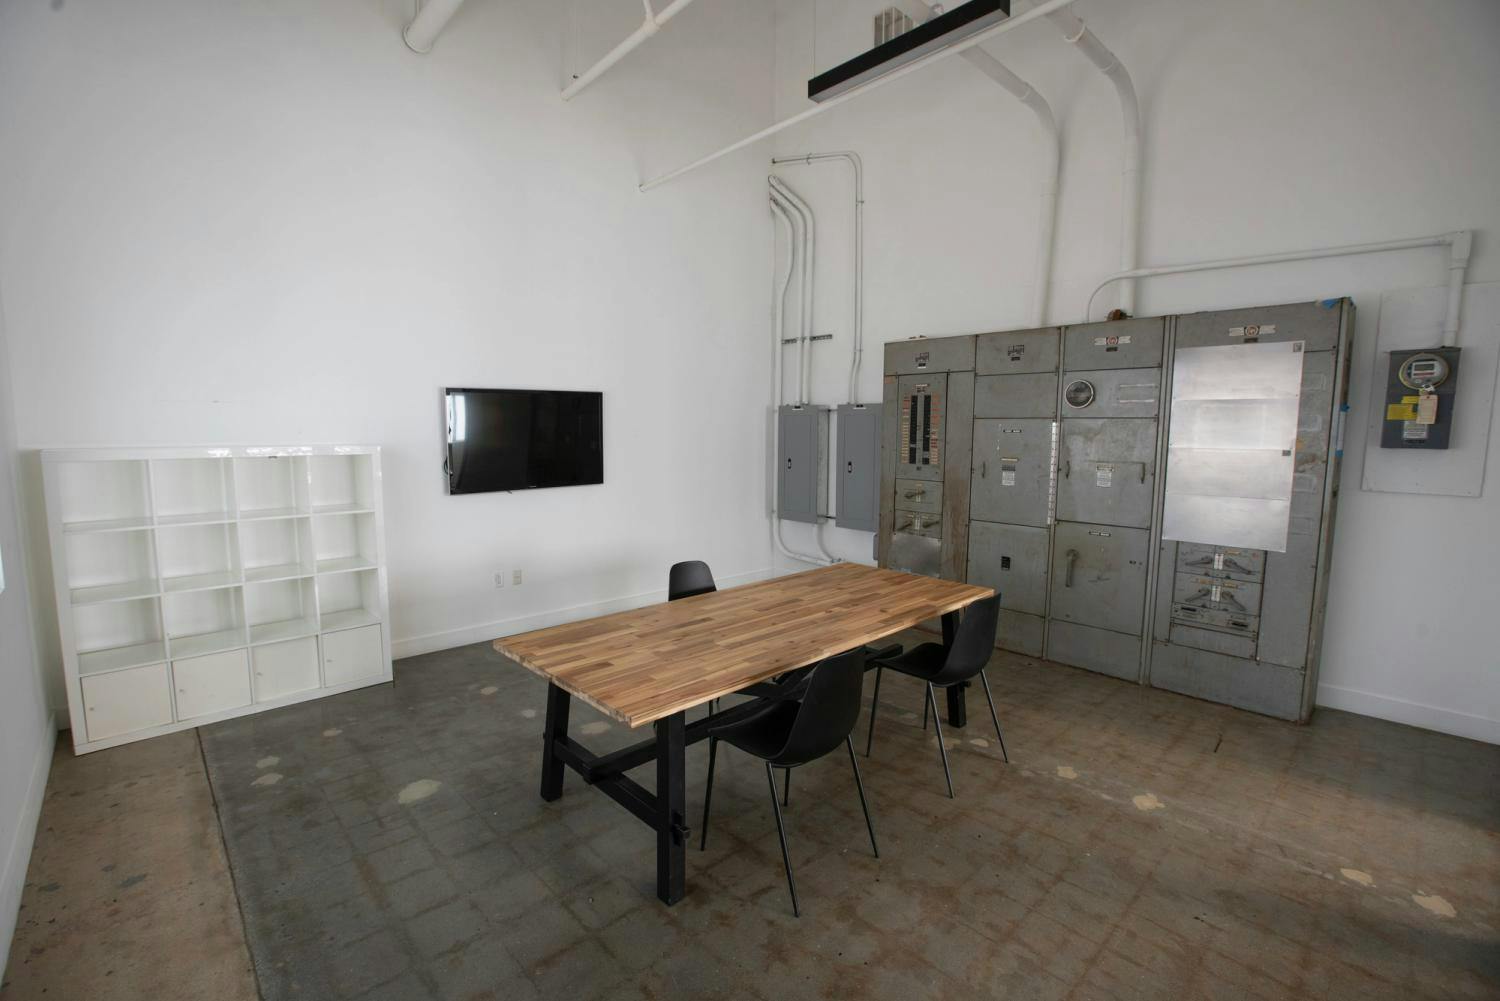  A functional workspace featuring a wooden table with black chairs, a wall-mounted TV, and a large metal utility cabinet, set against industrial flooring.